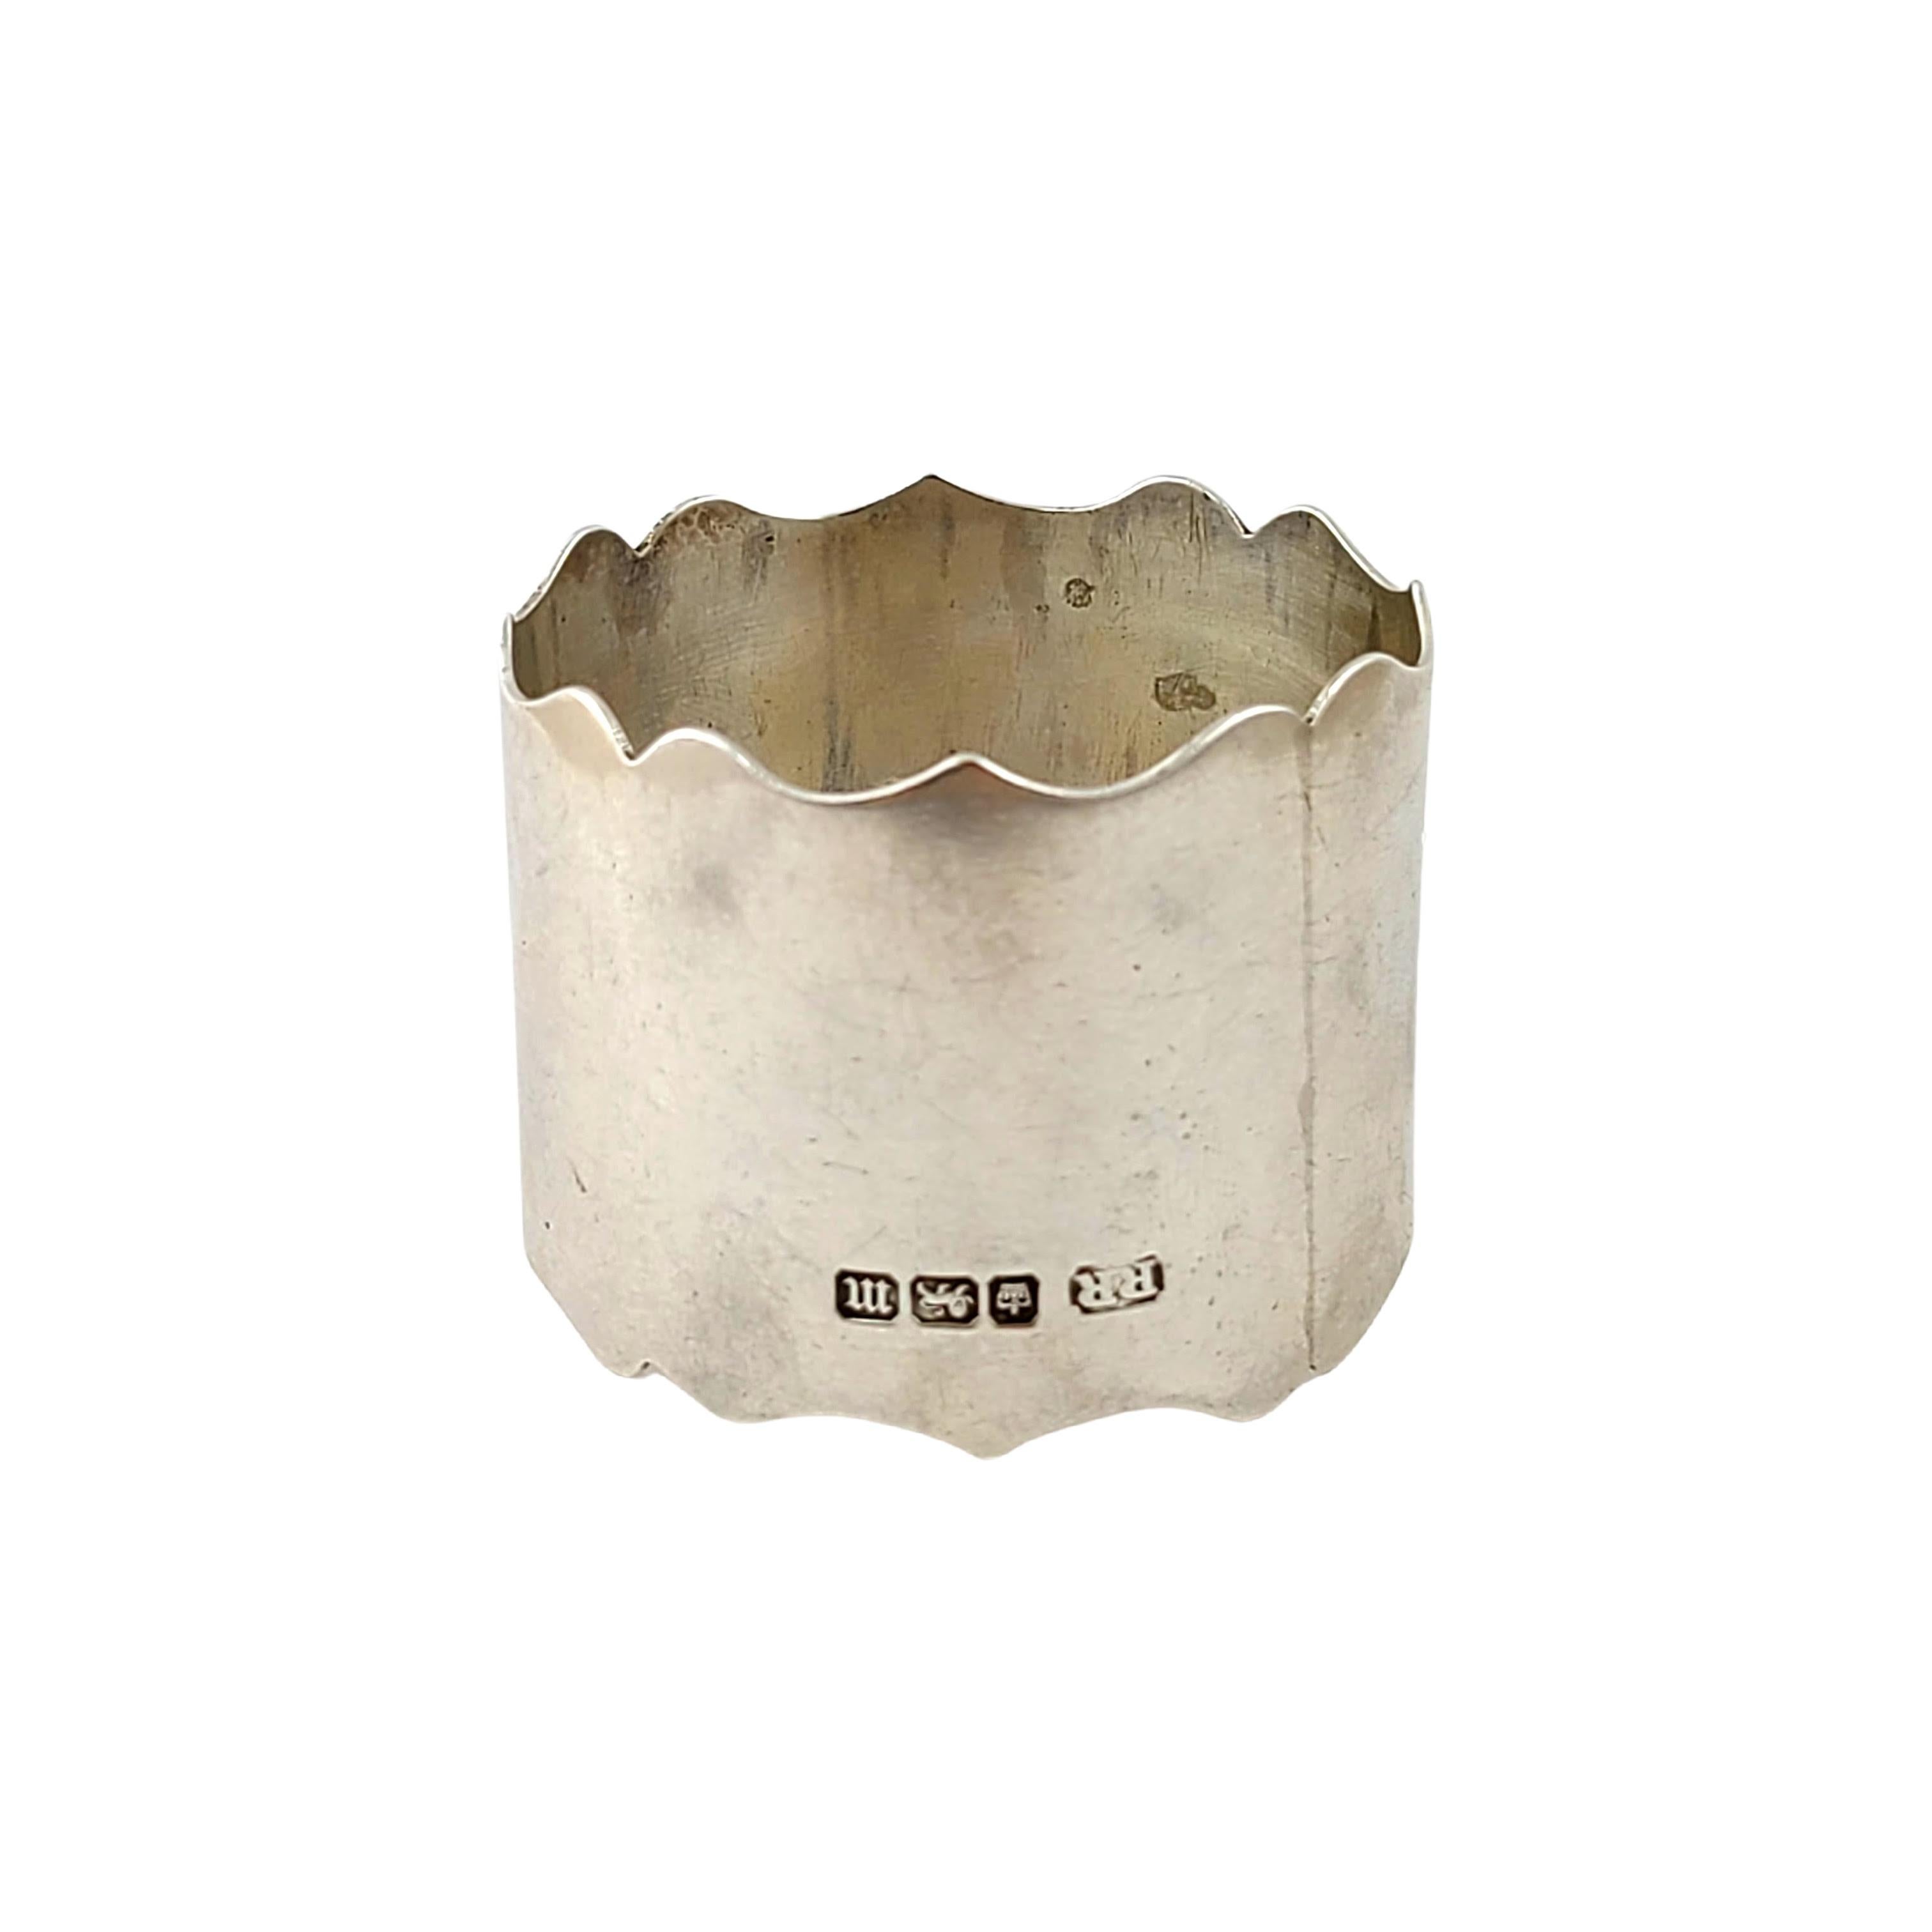 Richard Richardson Sheffield Sterling Silver Napkin Ring with Monogram In Good Condition For Sale In Washington Depot, CT